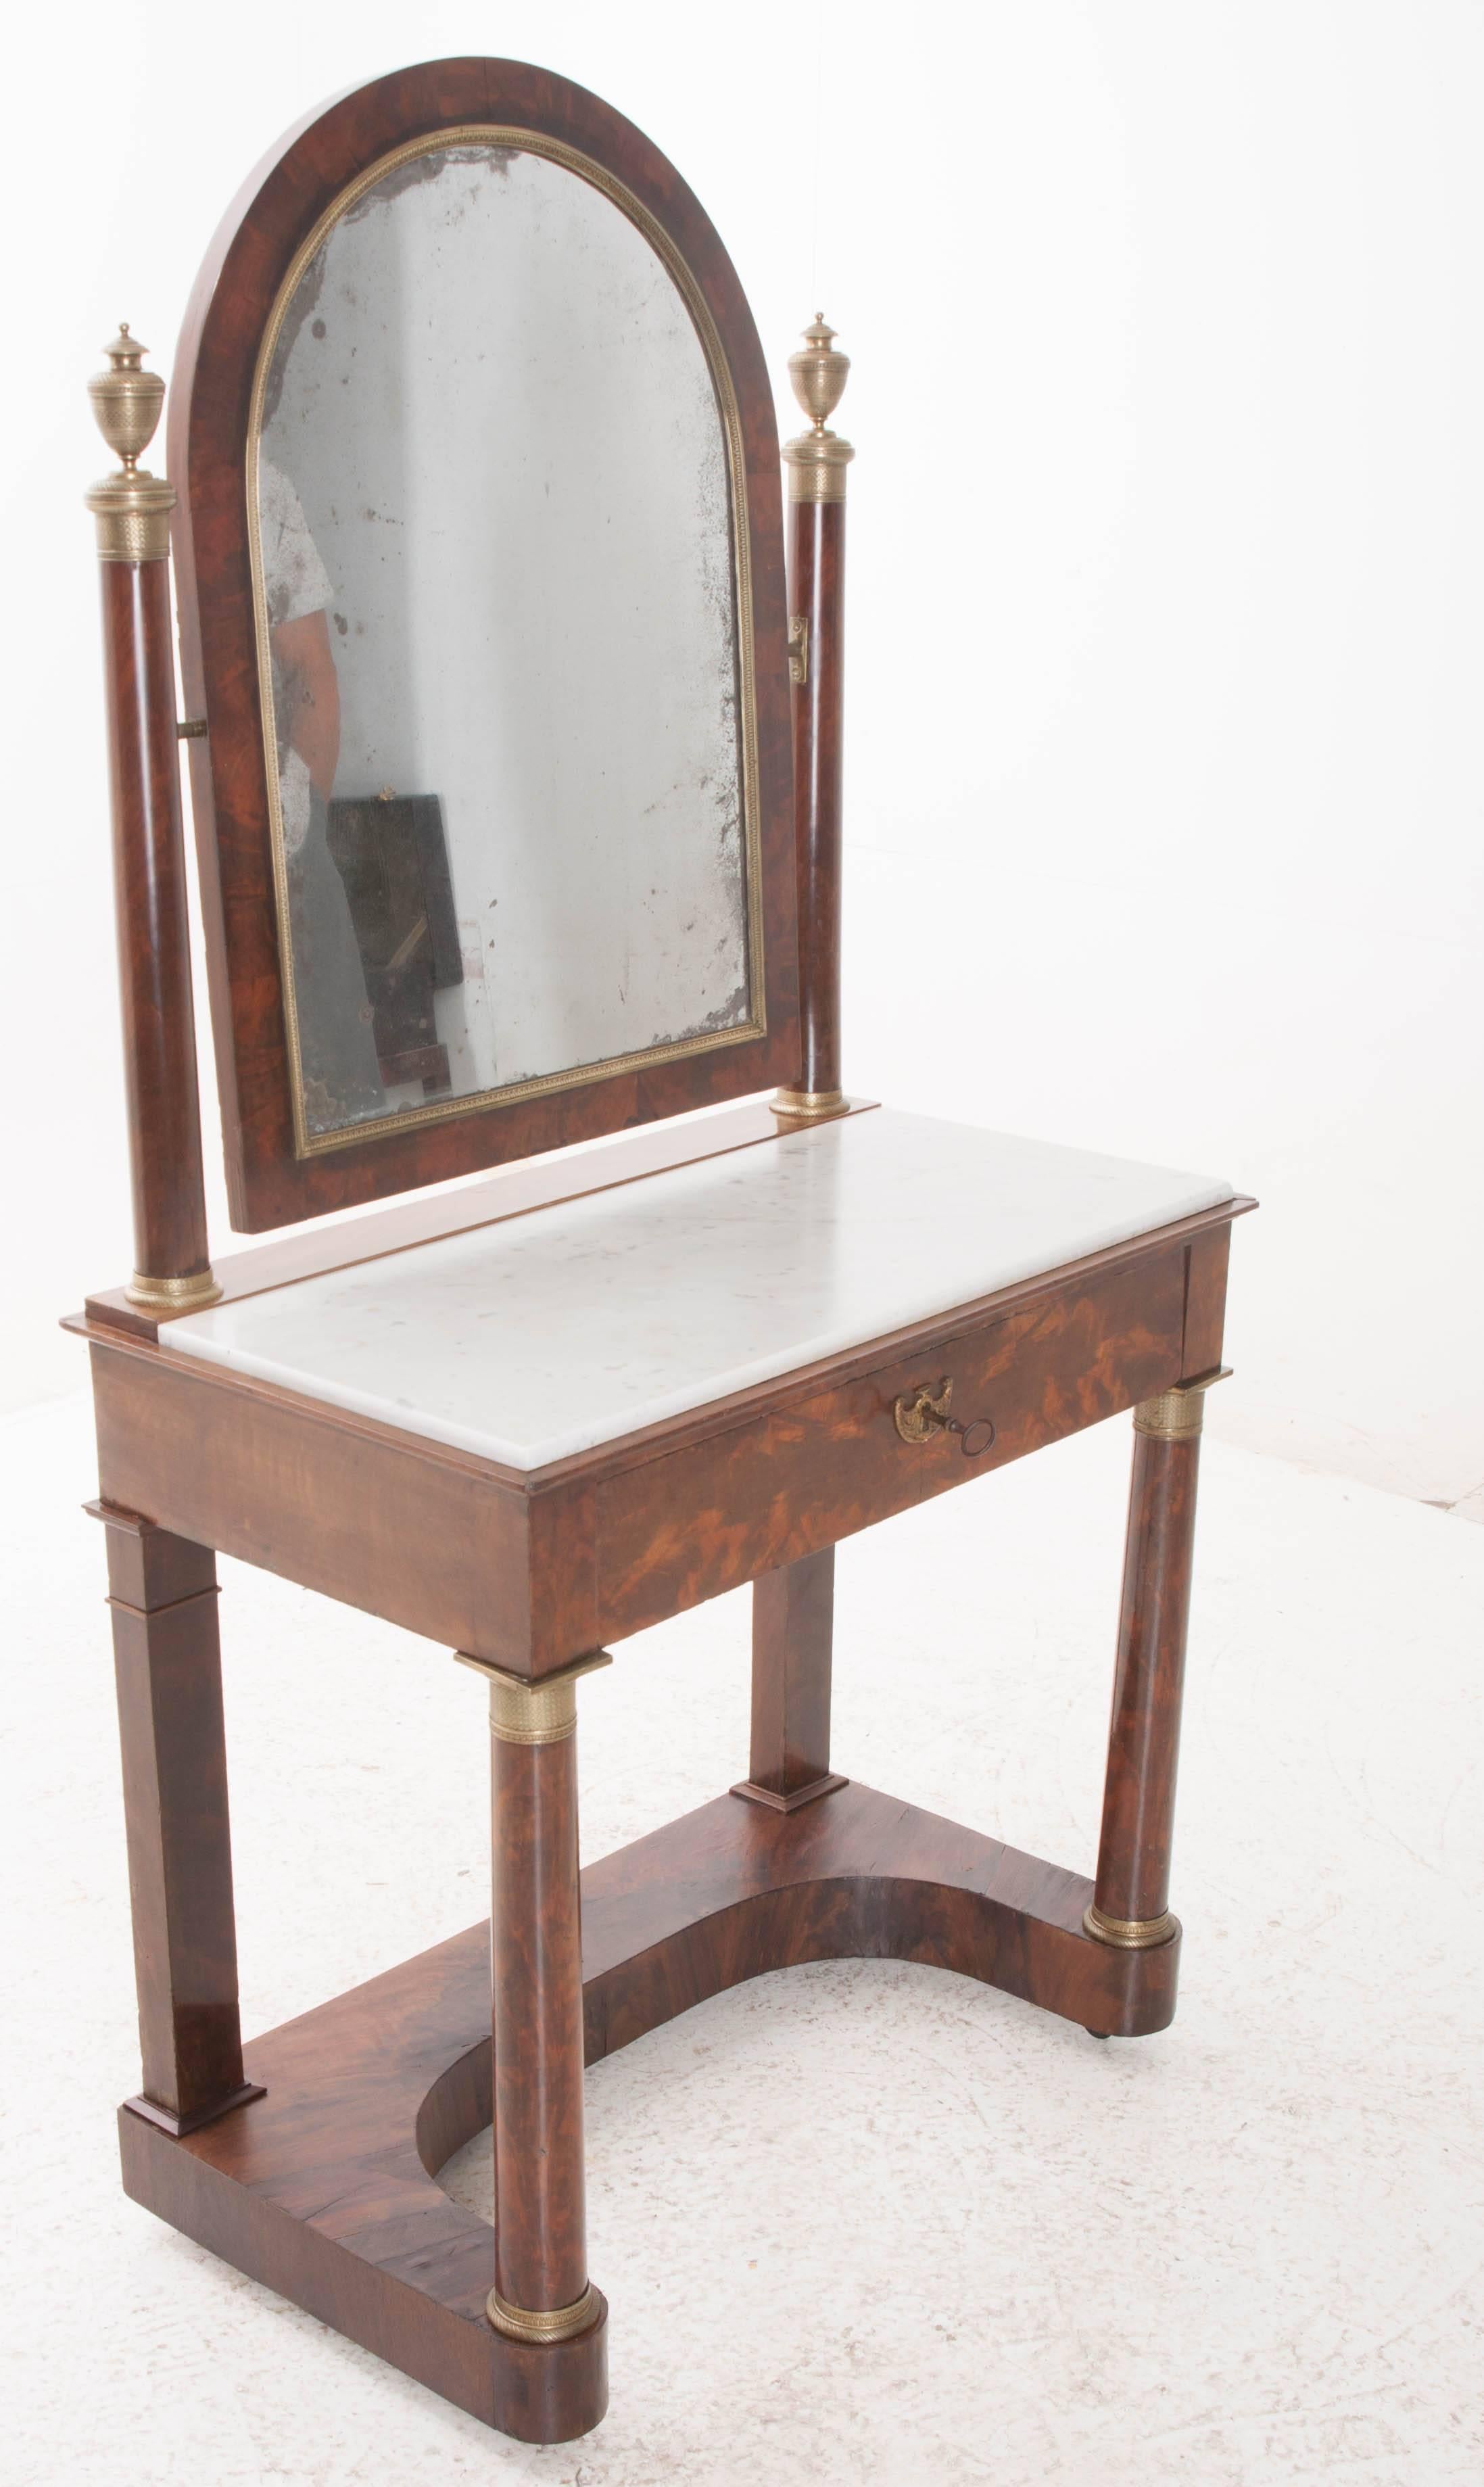 This exceptional French 19th century Empire mahogany dressing table is complete with its original mercury glass mirror and white marble top. The arched mirror boasts brilliant foxing and is framed with beautiful brass trim. It is supported by